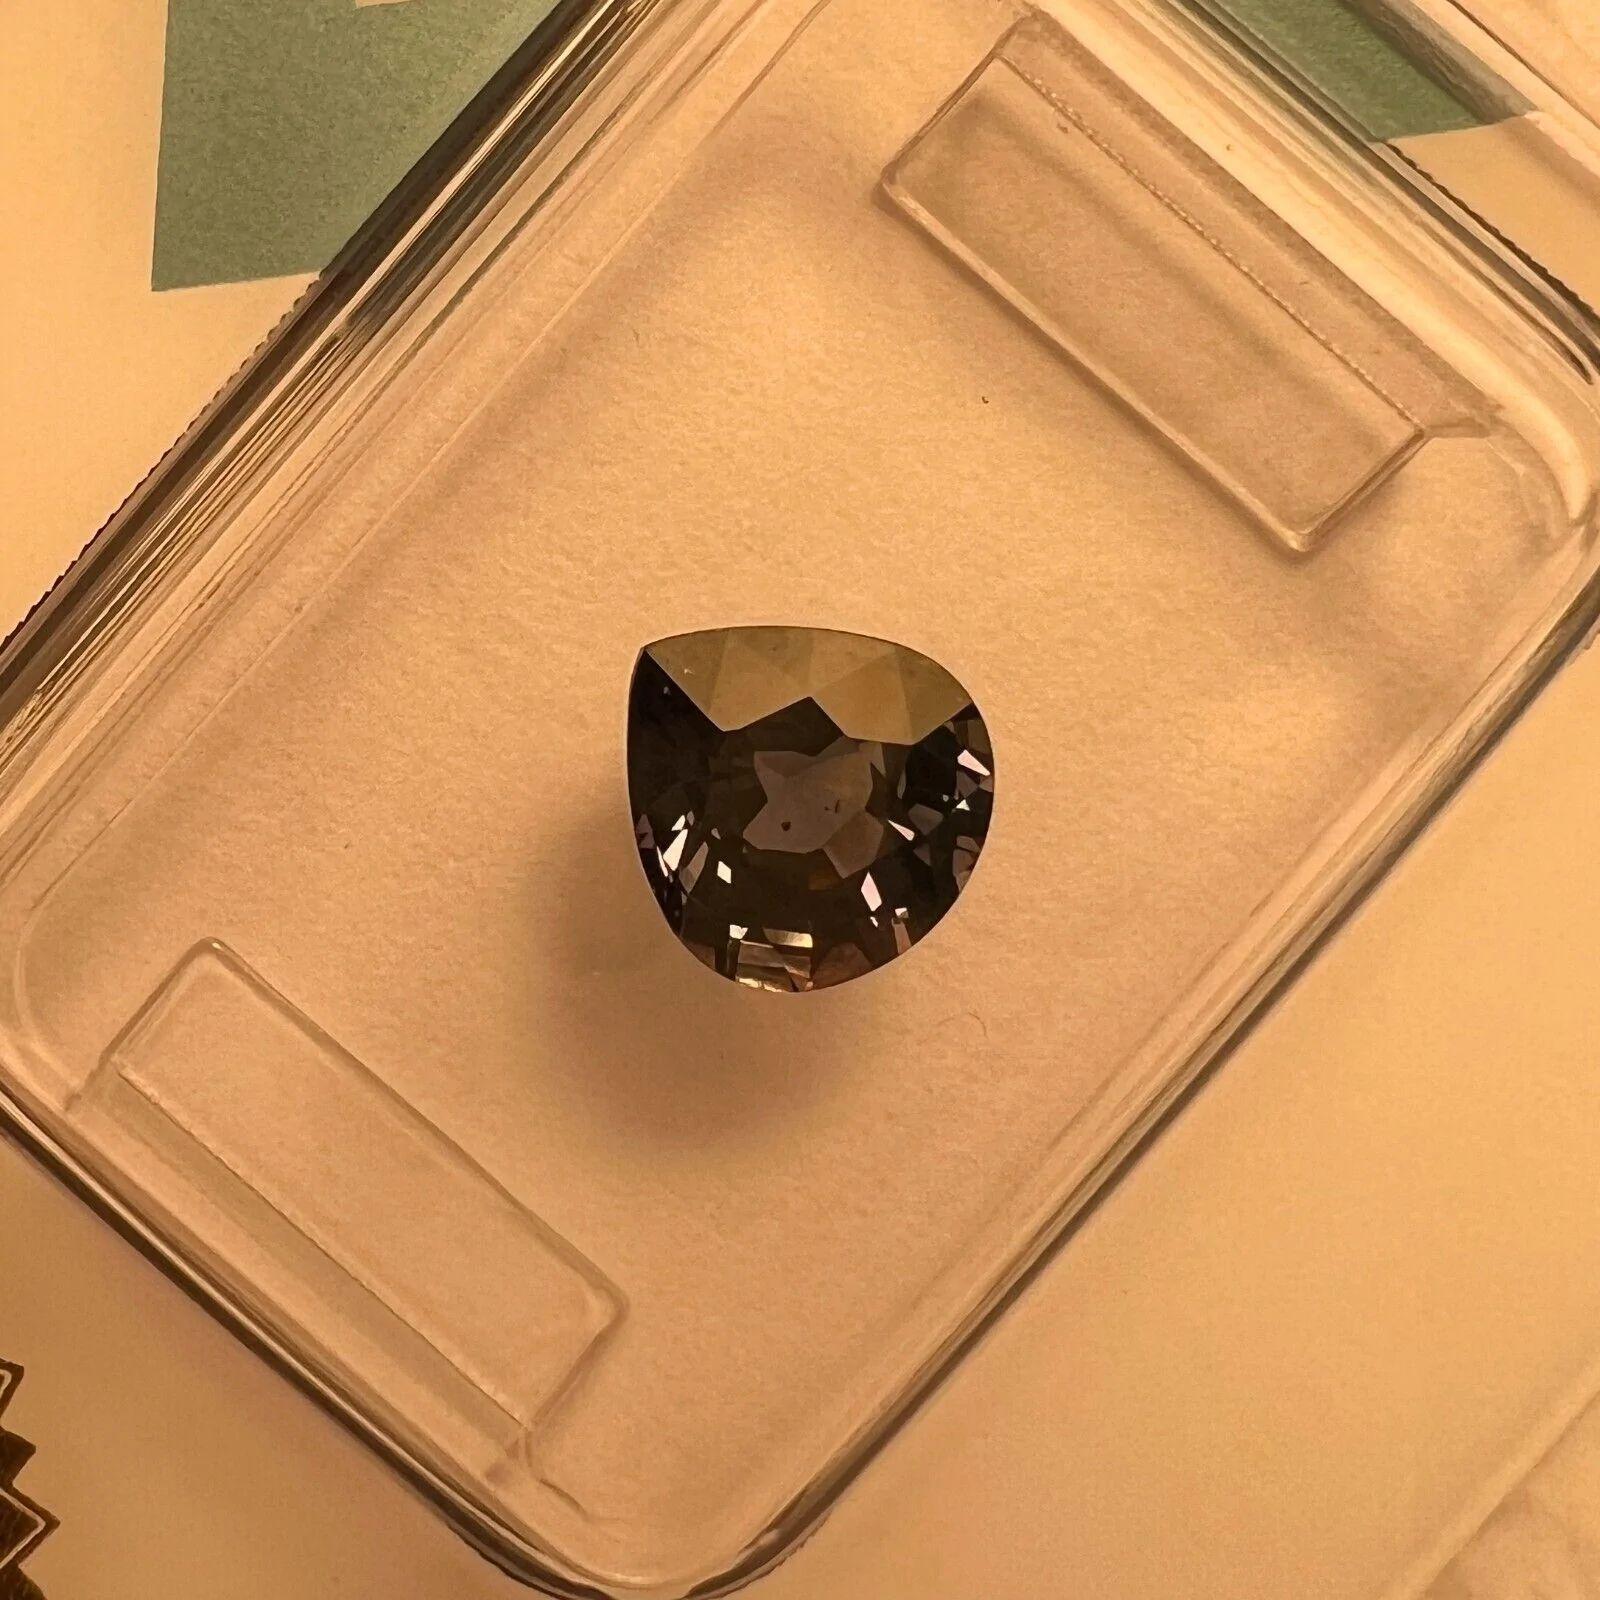 Unheated 1.19ct Colour Change Sapphire Green Blue Purple IGI Certified Pear Cut

Rare Untreated Colour Change Sapphire Gemstone.
1.19 Carat unheated sapphire with a rare colour change effect. Changing colour depending on the light its viewed in.